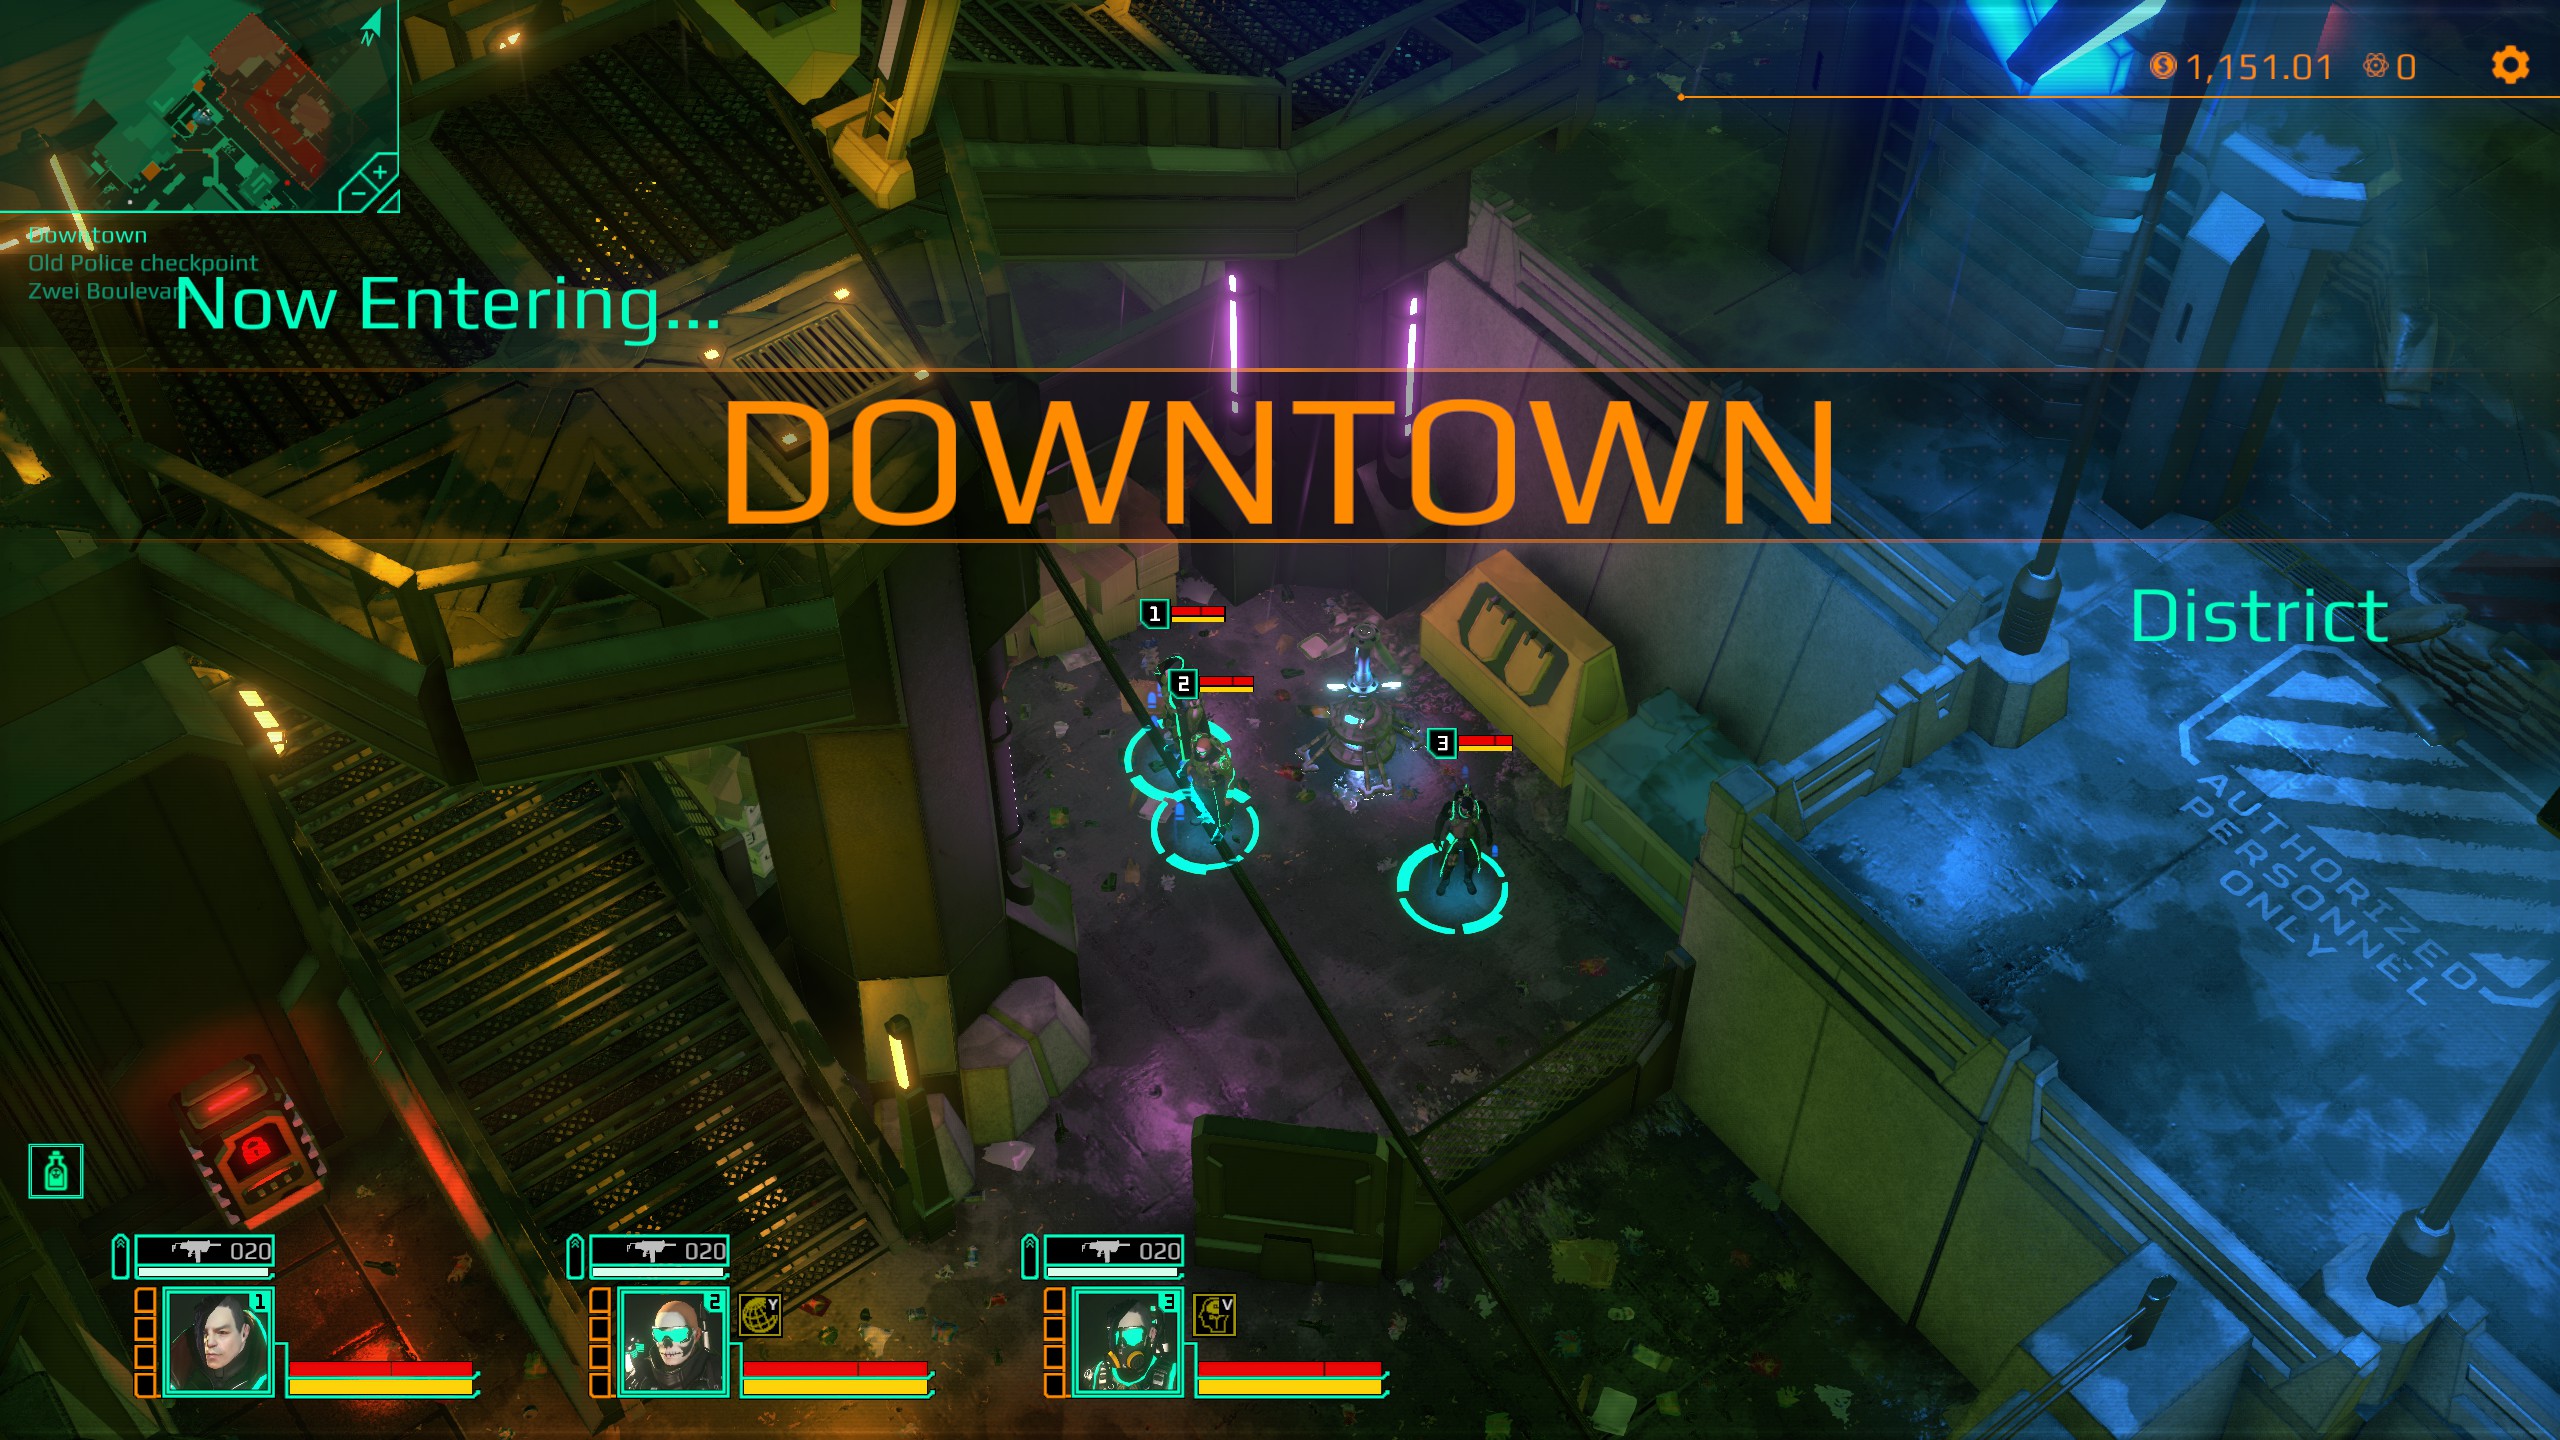 Shadowrun 2007 almost had a System Shock-style singleplayer campaign